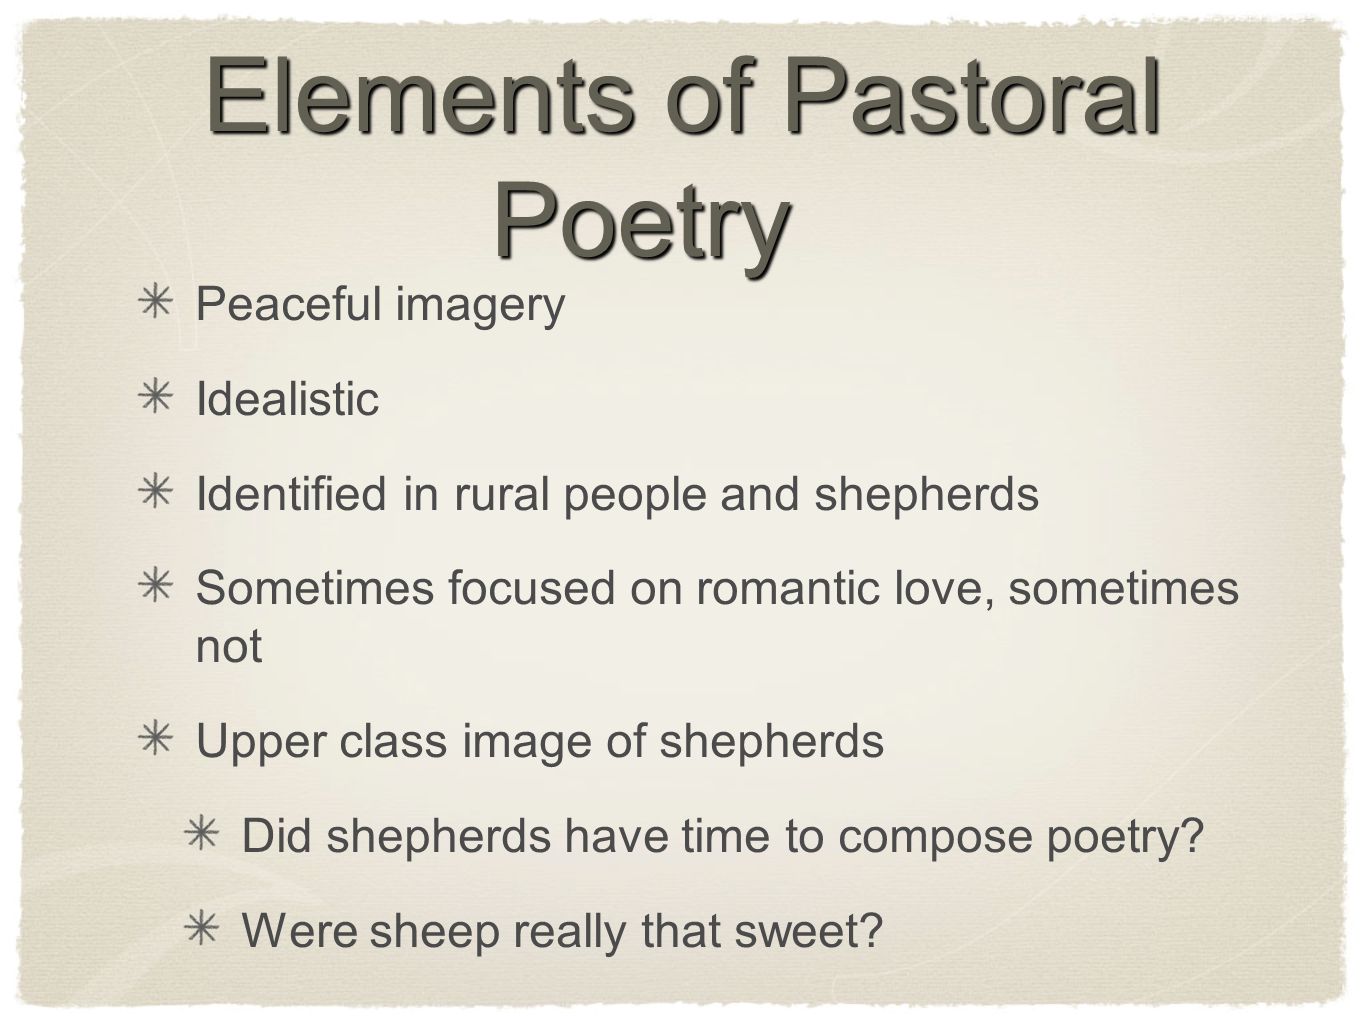 Pastoral poetry “The Passionate Shepherd to His Love” and “The